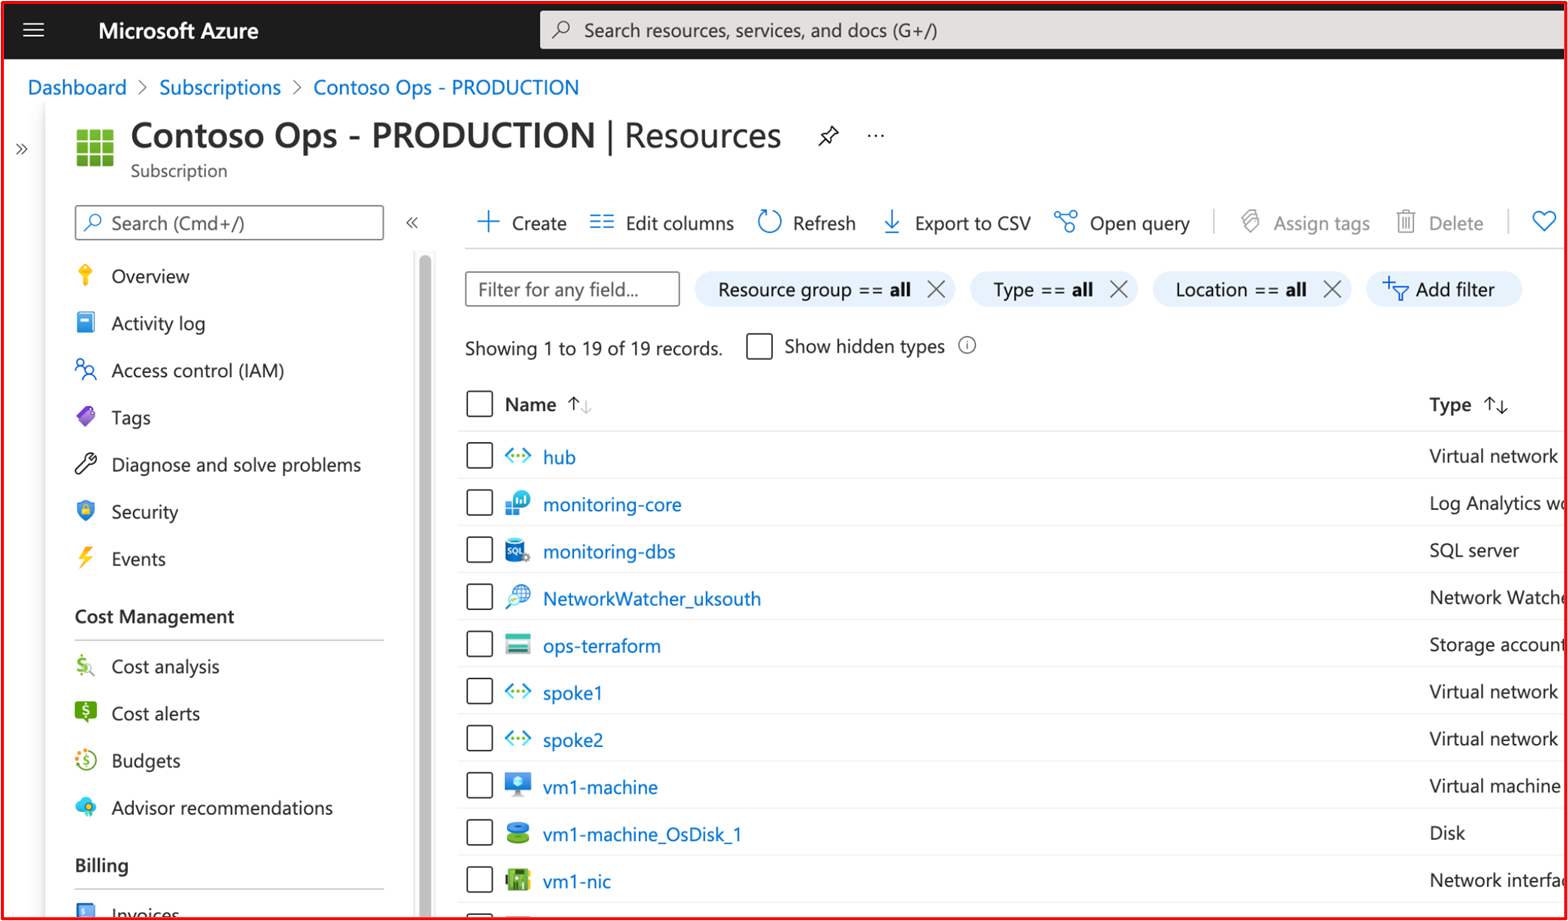 screenshot shows a separate Azure subscription for Contoso's 'PRODUCTION' environment.